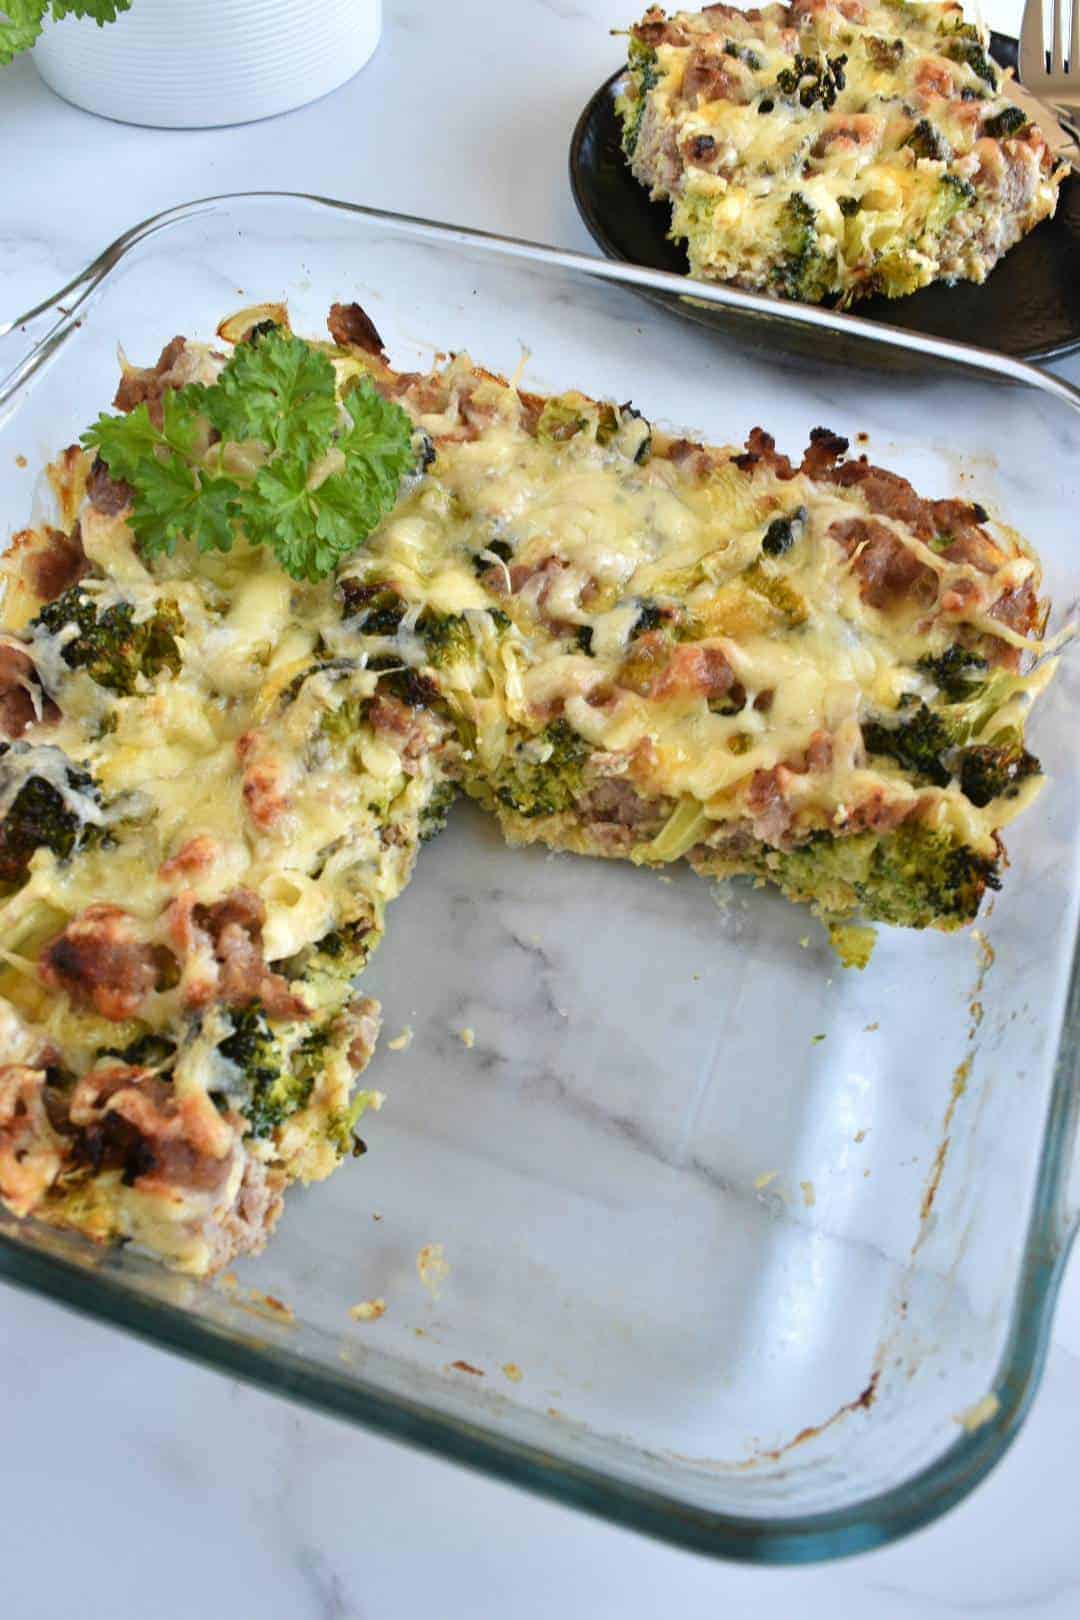 Broccoli and sausage casserole in a dish, with one serving plated on the side.